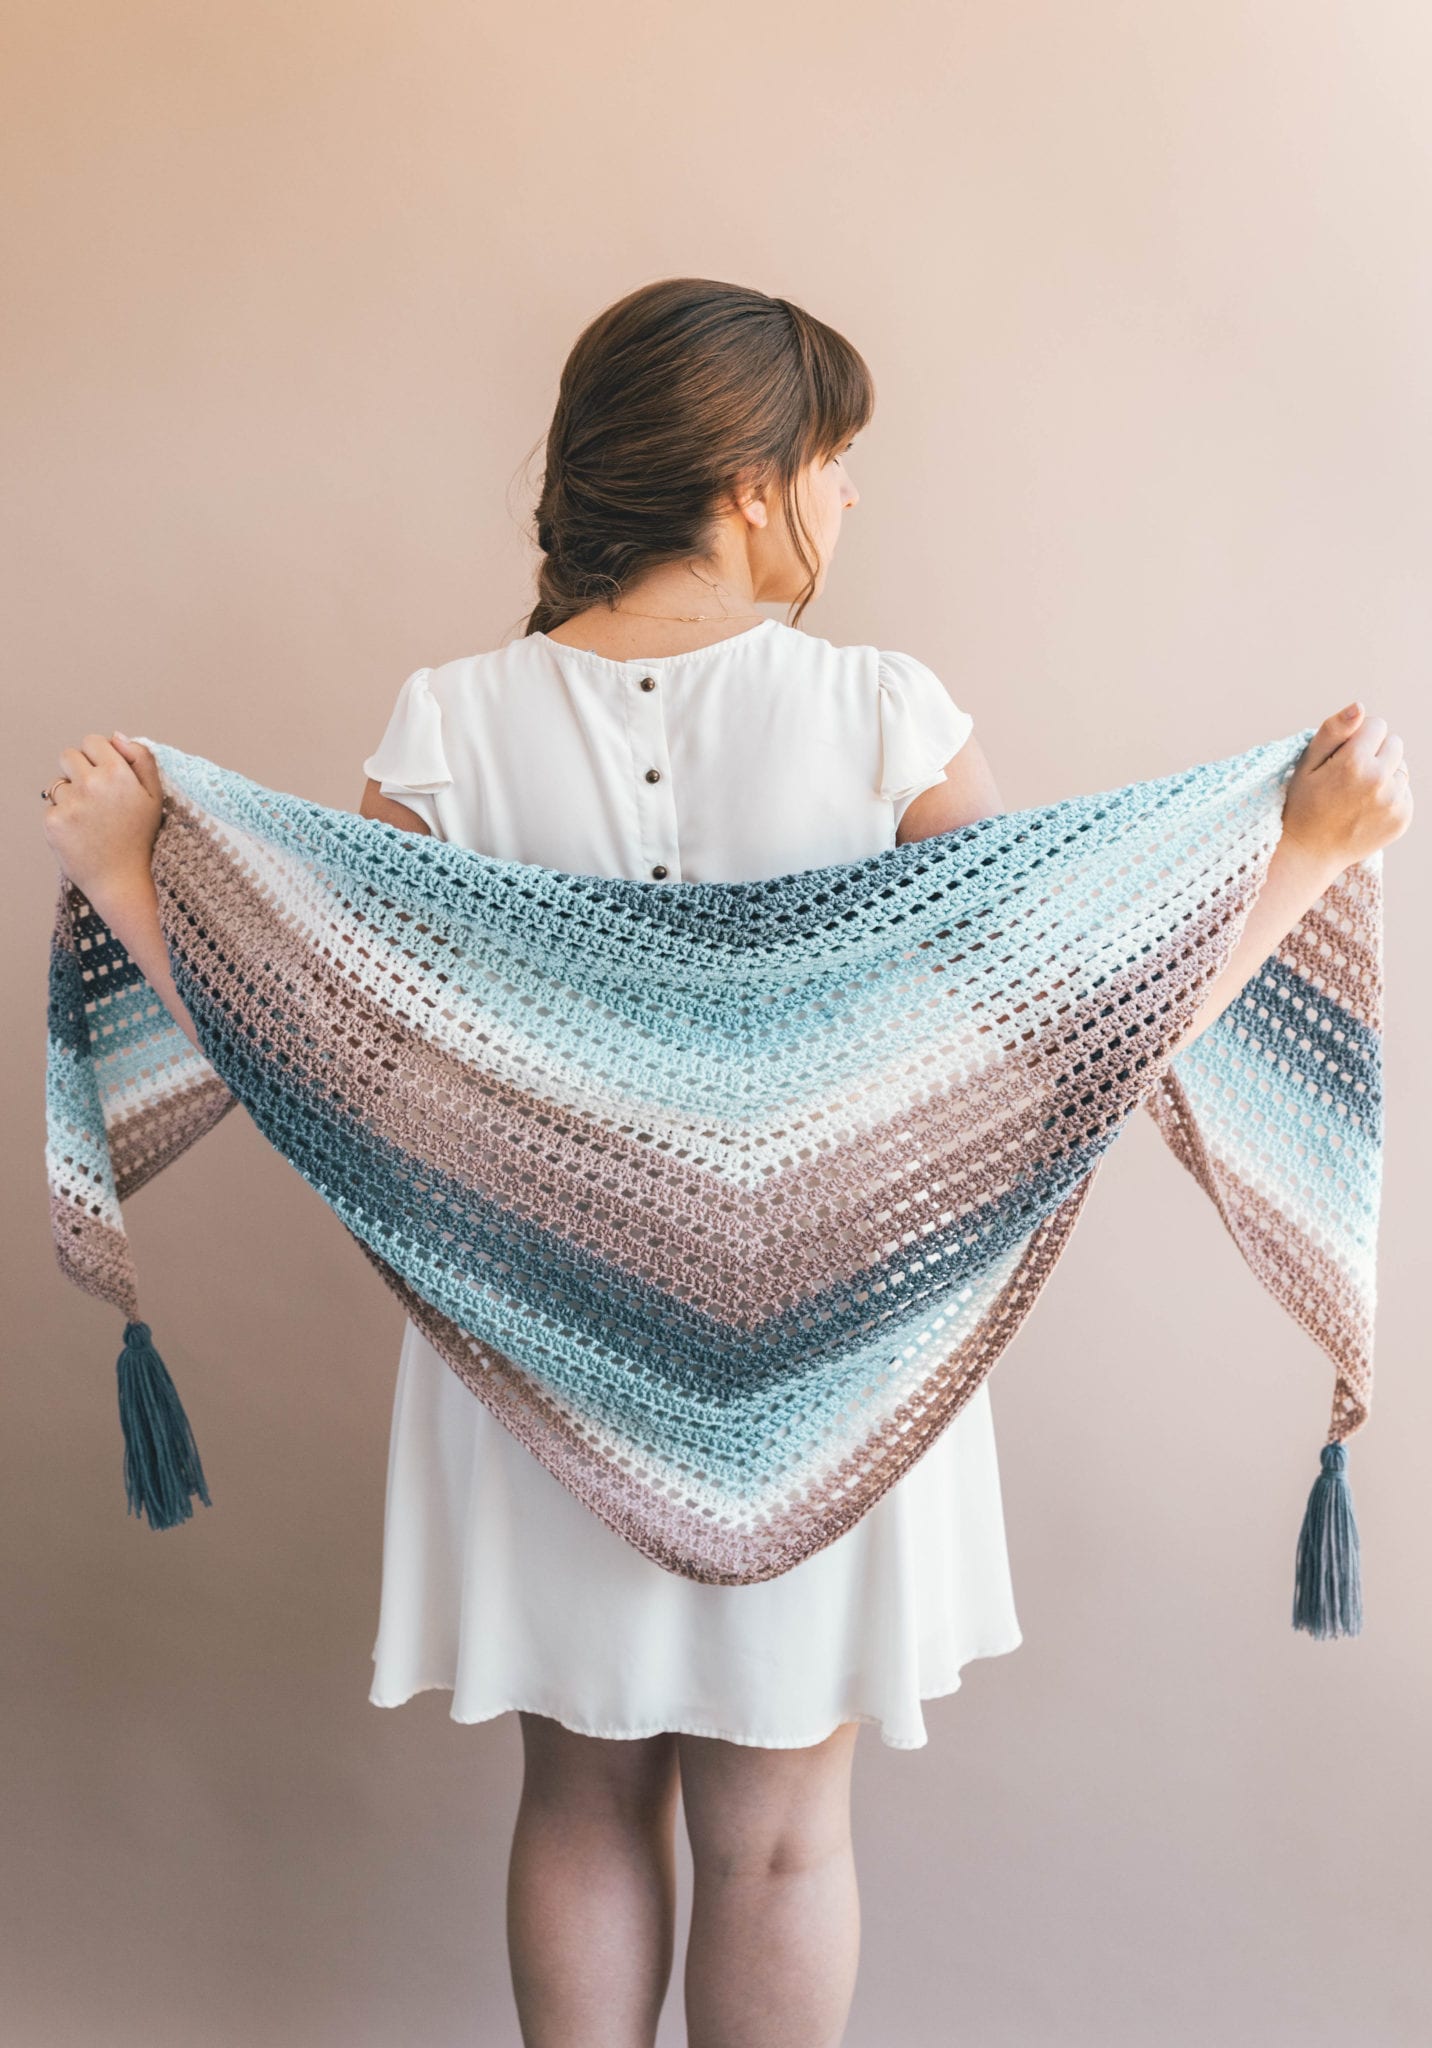 What can I crochet with self-striping yarn? This beautiful shawl looks wonderful in Lion Brand Mandala baby yarn doesn't it?! This pattern would also look great using Scheepjes whirl! #crochet #crochetwrap #crochetshawl